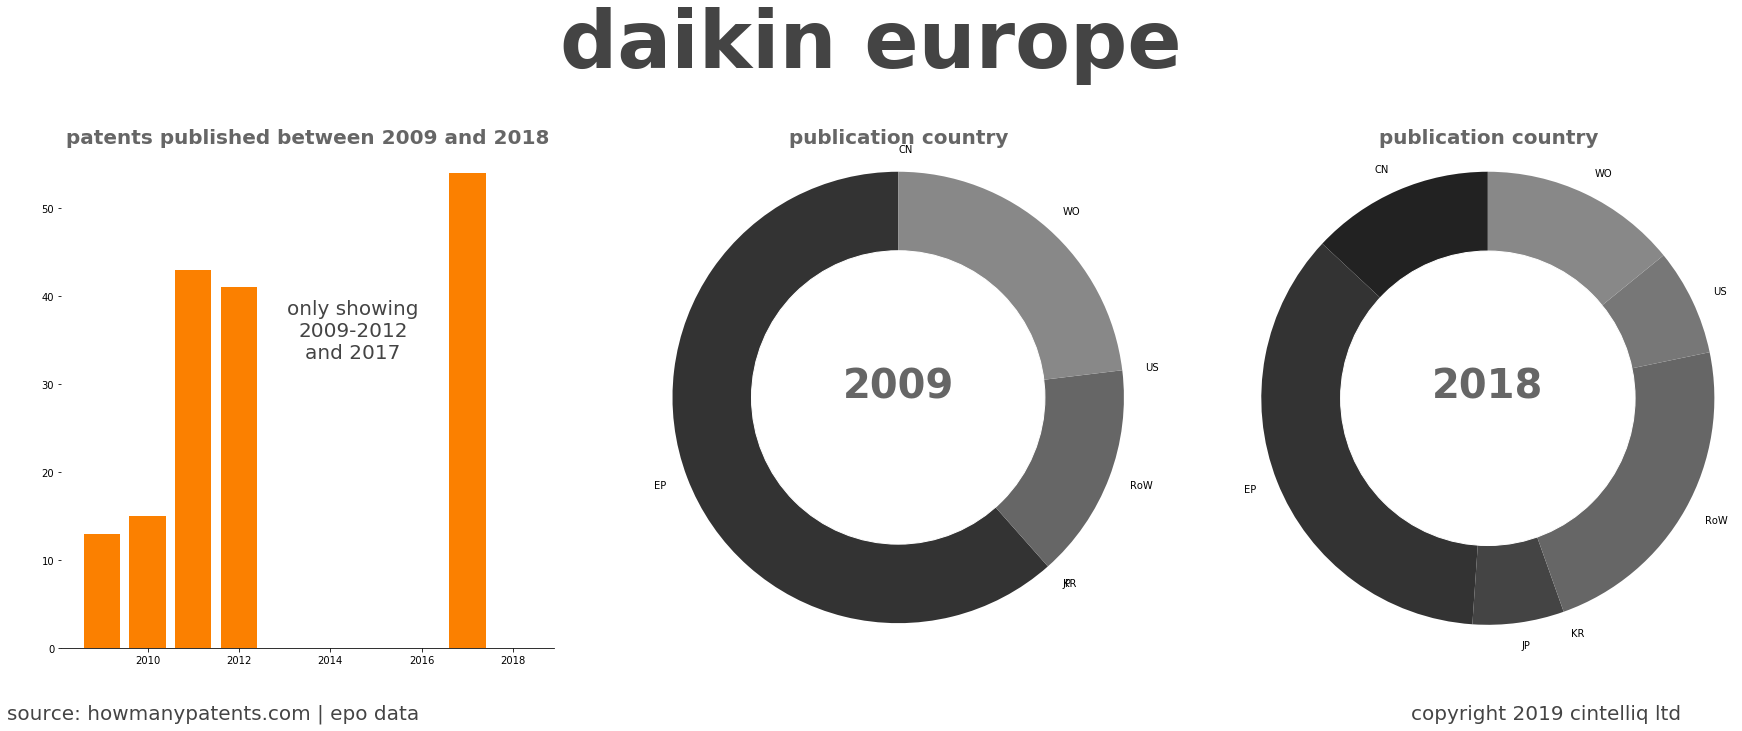 summary of patents for Daikin Europe